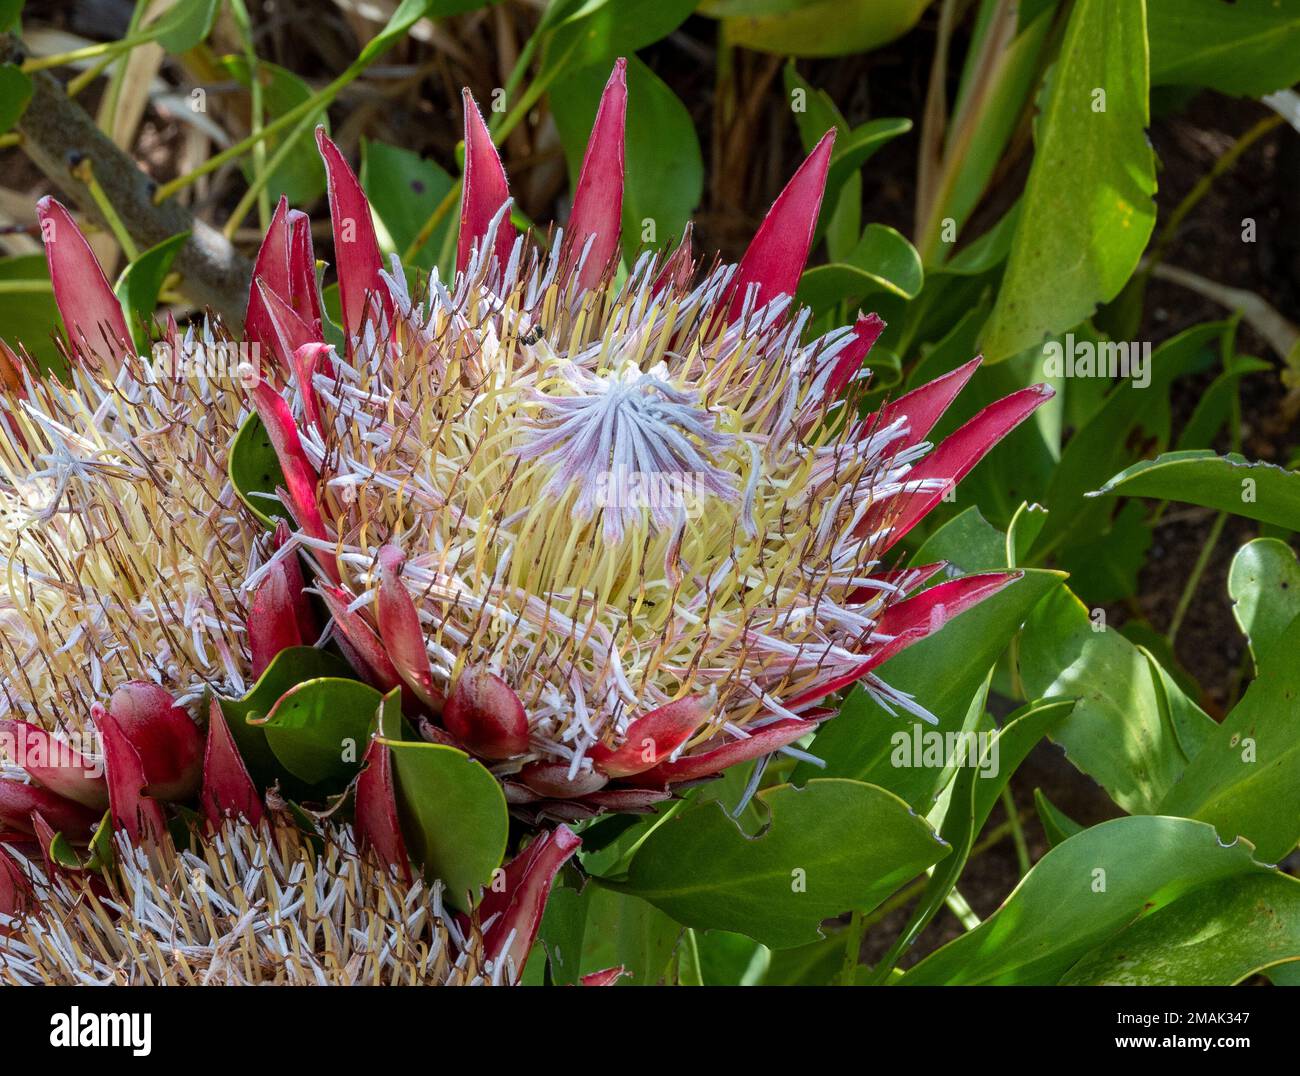 Giant flowers of King Protea (Protea cynaroides). Cape Town, South Africa. Stock Photo